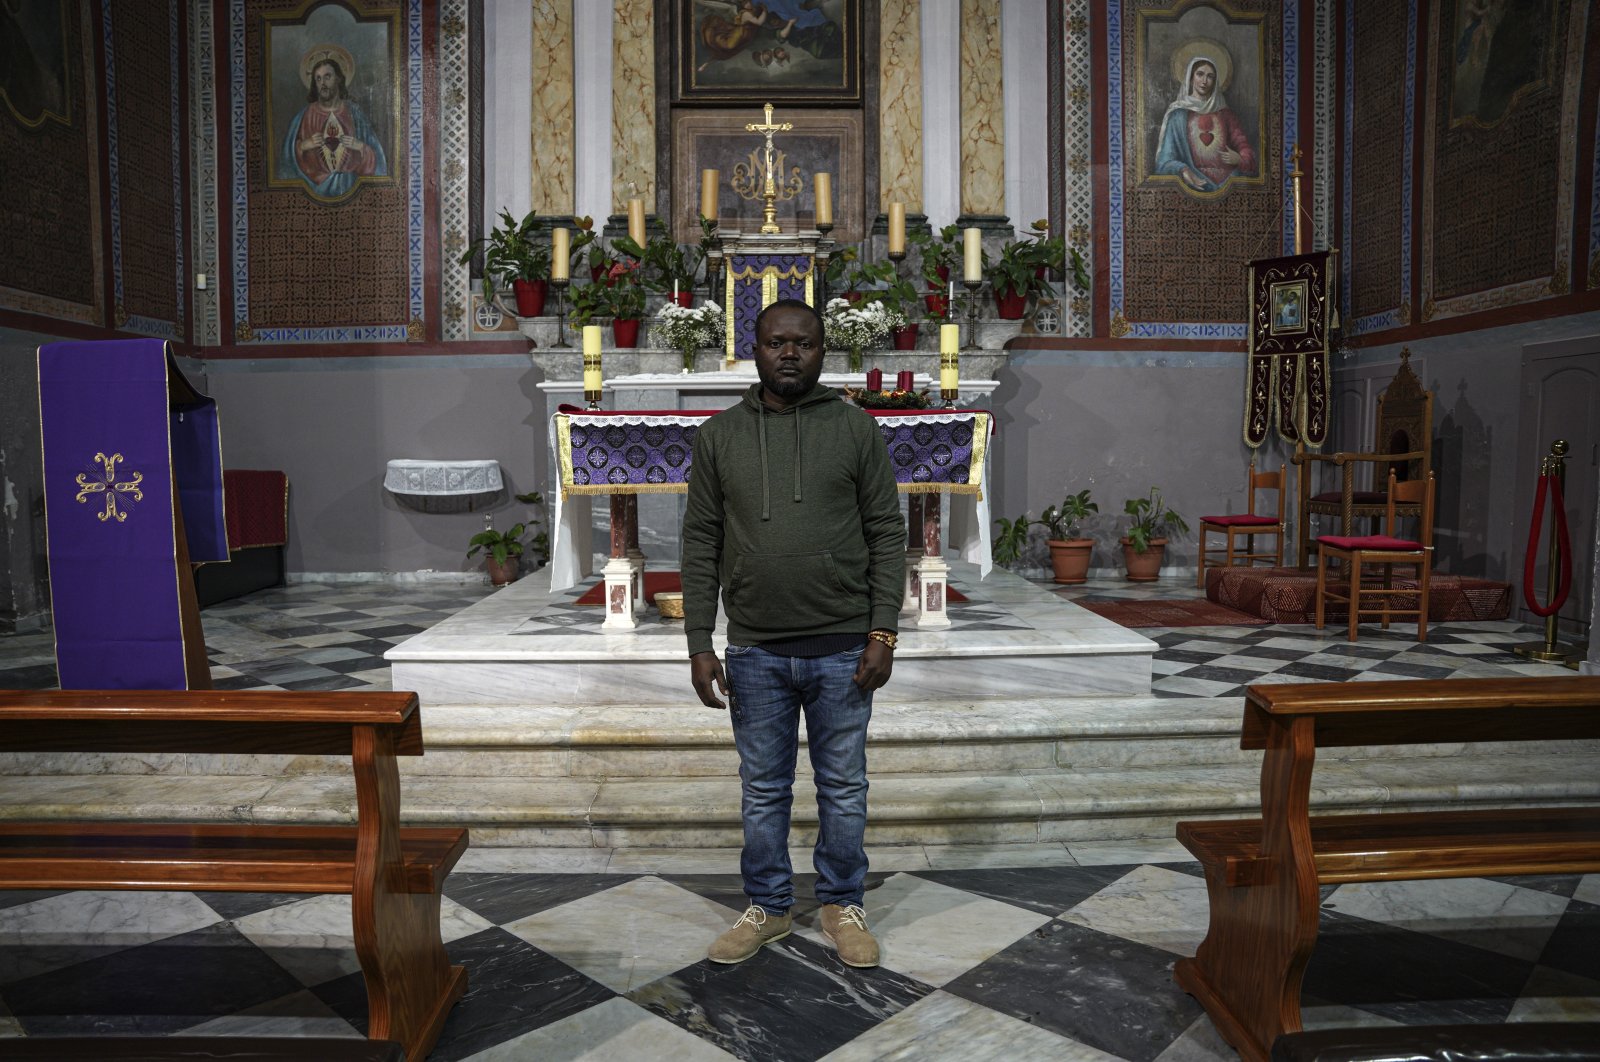 Christian Tango Muyaka, a 30-year-old asylum-seeker from Congo, poses for a photograph inside a Catholic church in Mytilene port, on the northeastern Aegean island of Lesbos, Greece, Monday, Nov. 29, 2021. Muyaka will attend a Sunday service held by the pope at a new migrant camp on Lesbos. (AP Photo)